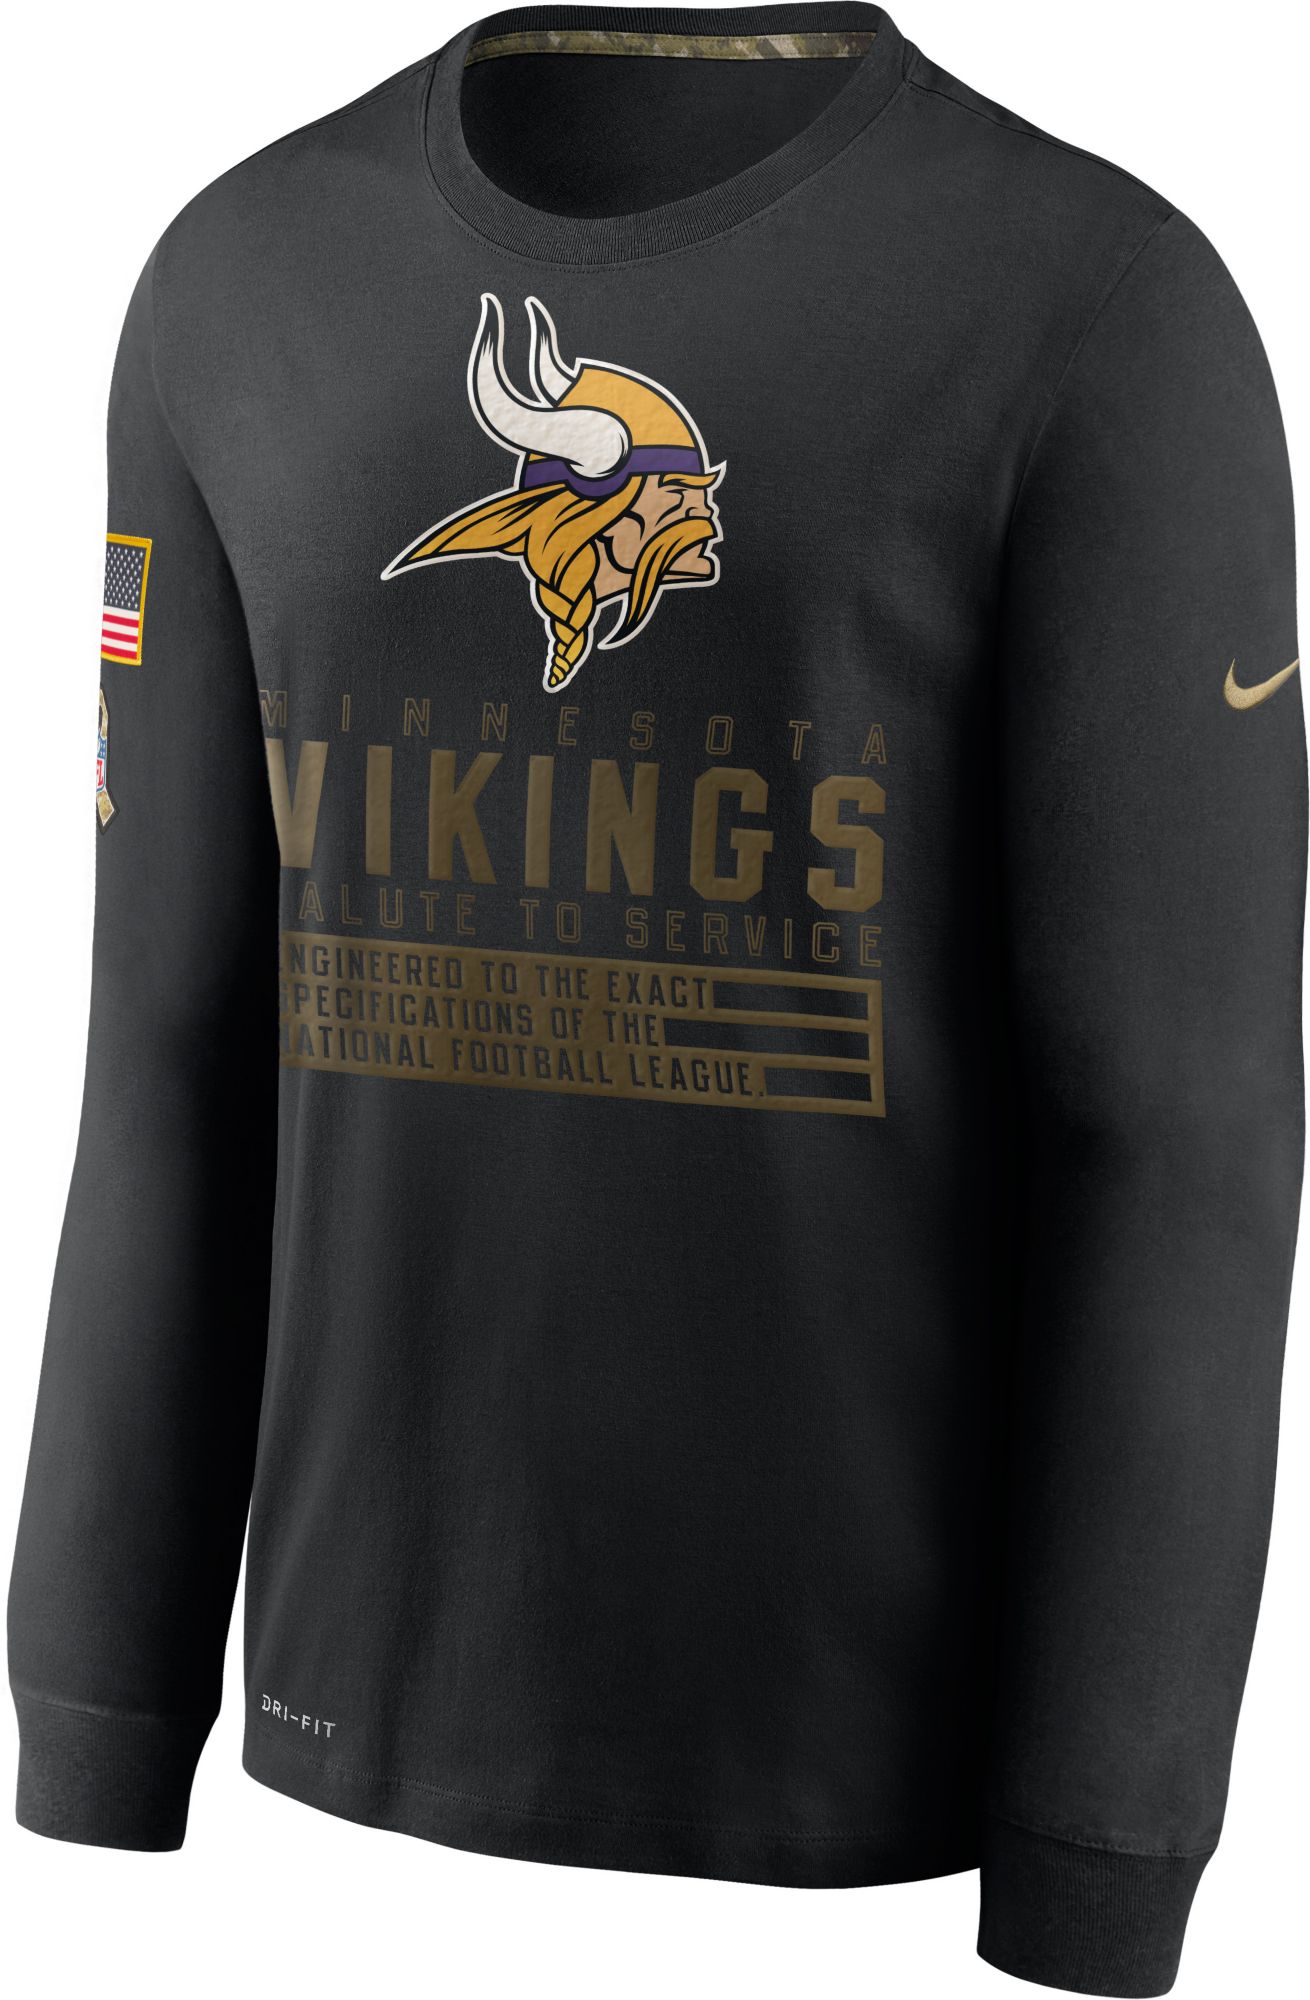 salute to service long sleeve